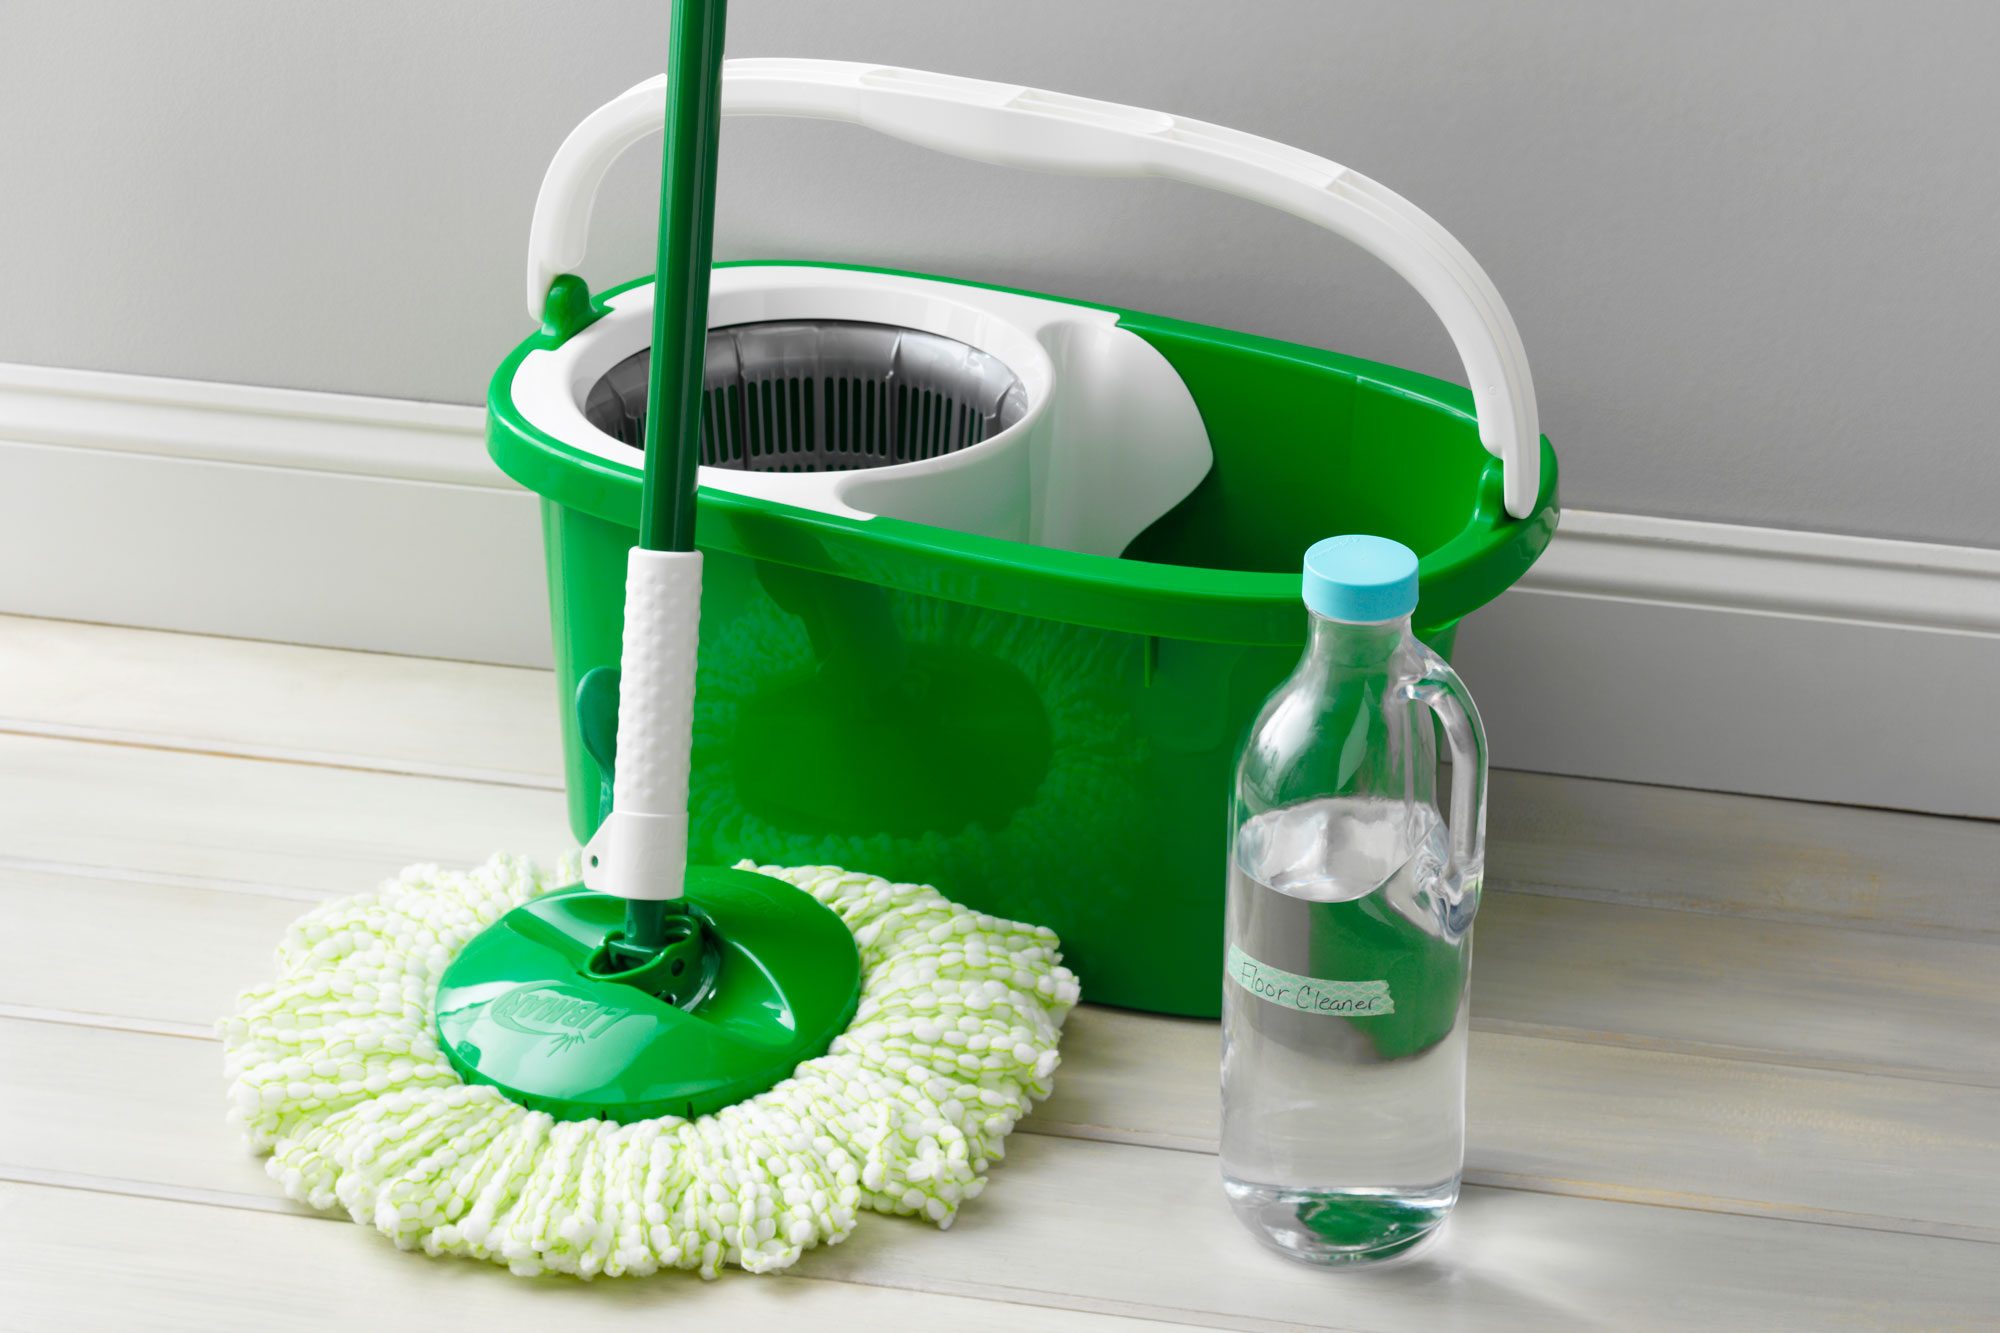 How to Make Mopping Solutions With Household Ingredients